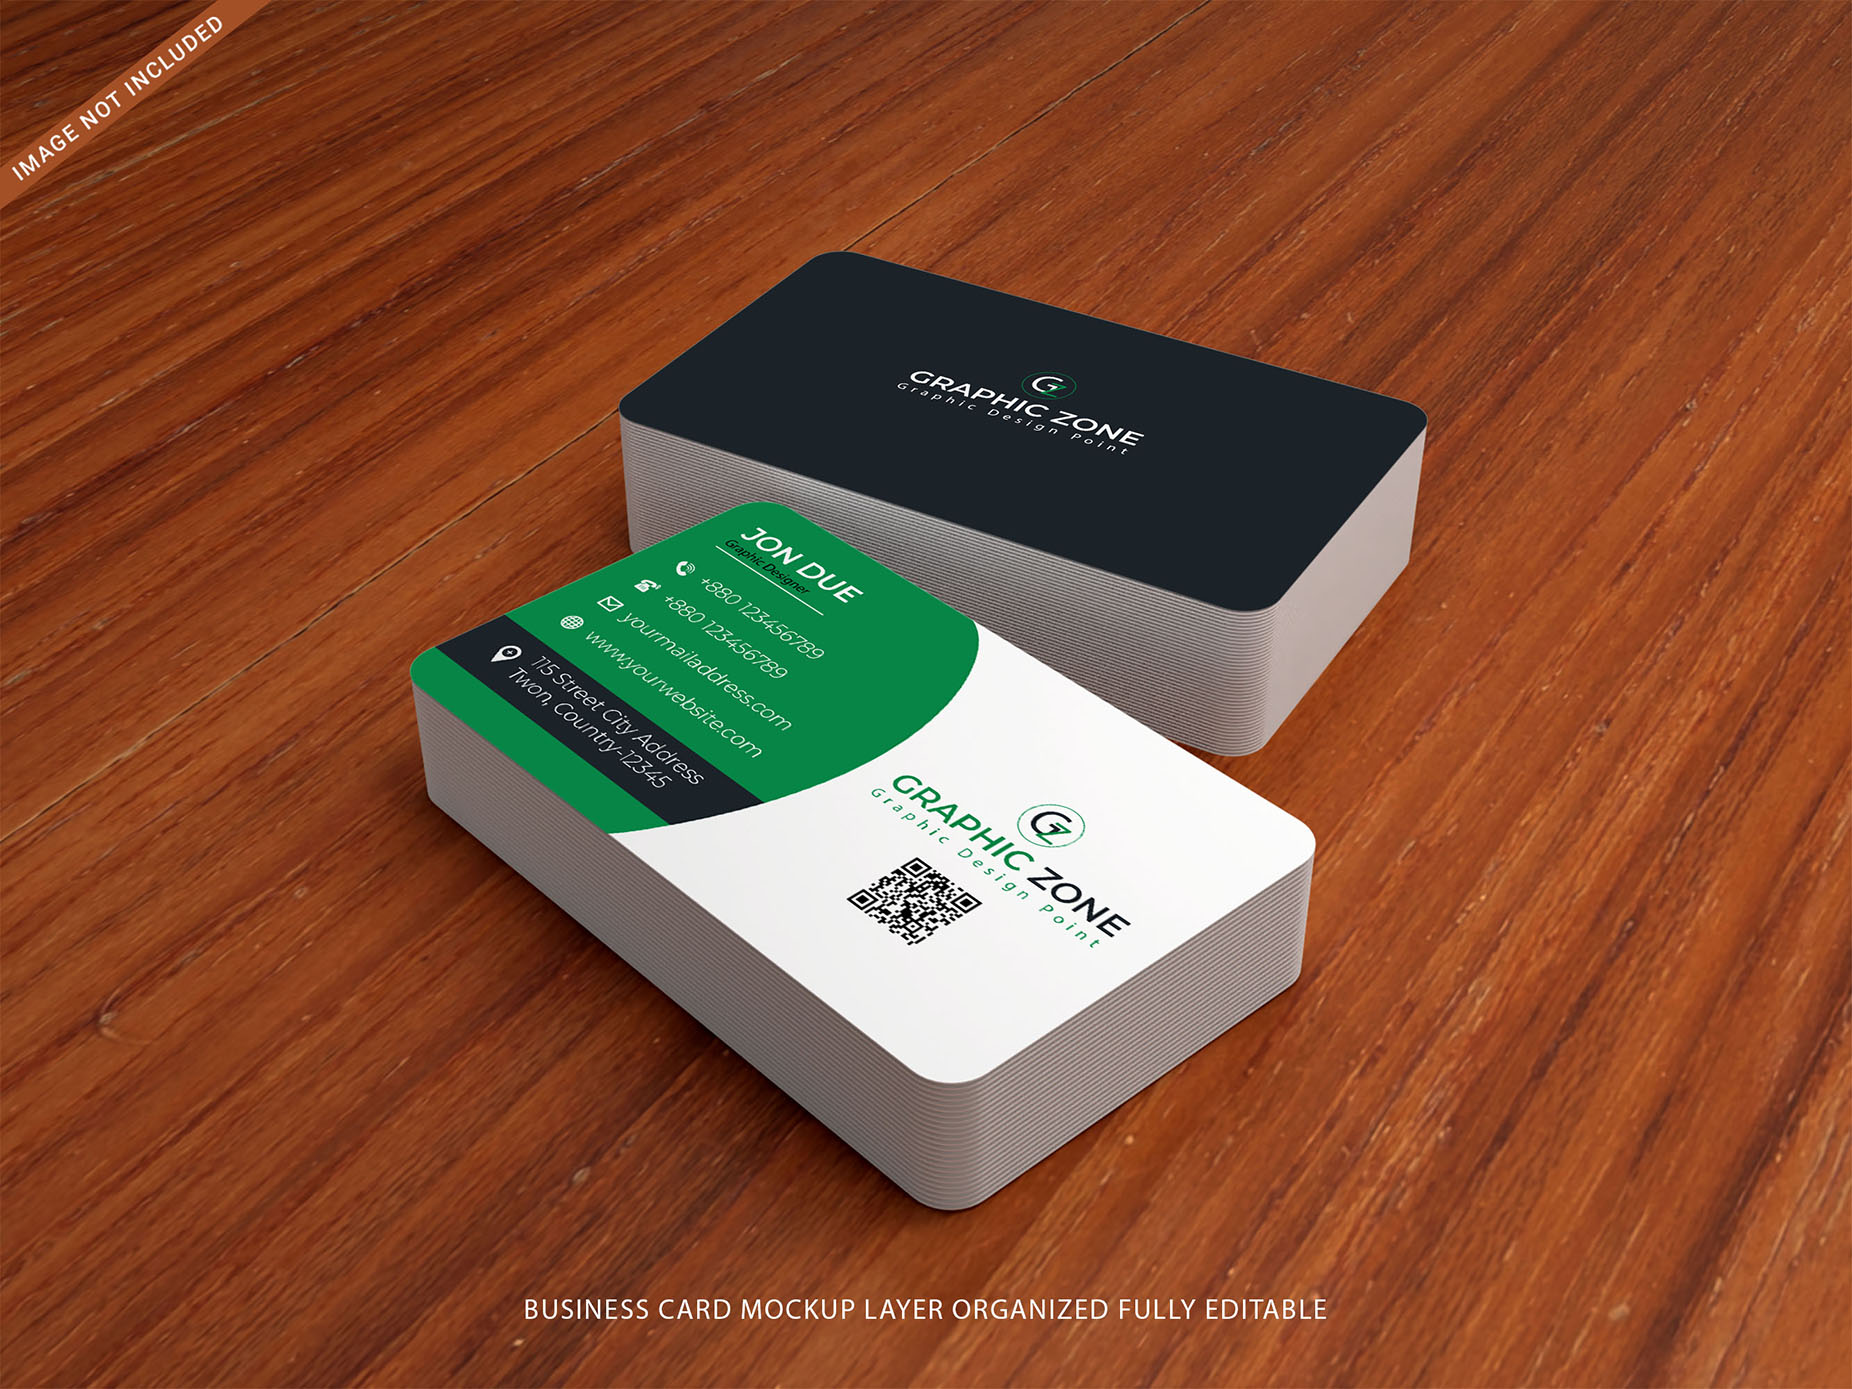 Green and white business cards.